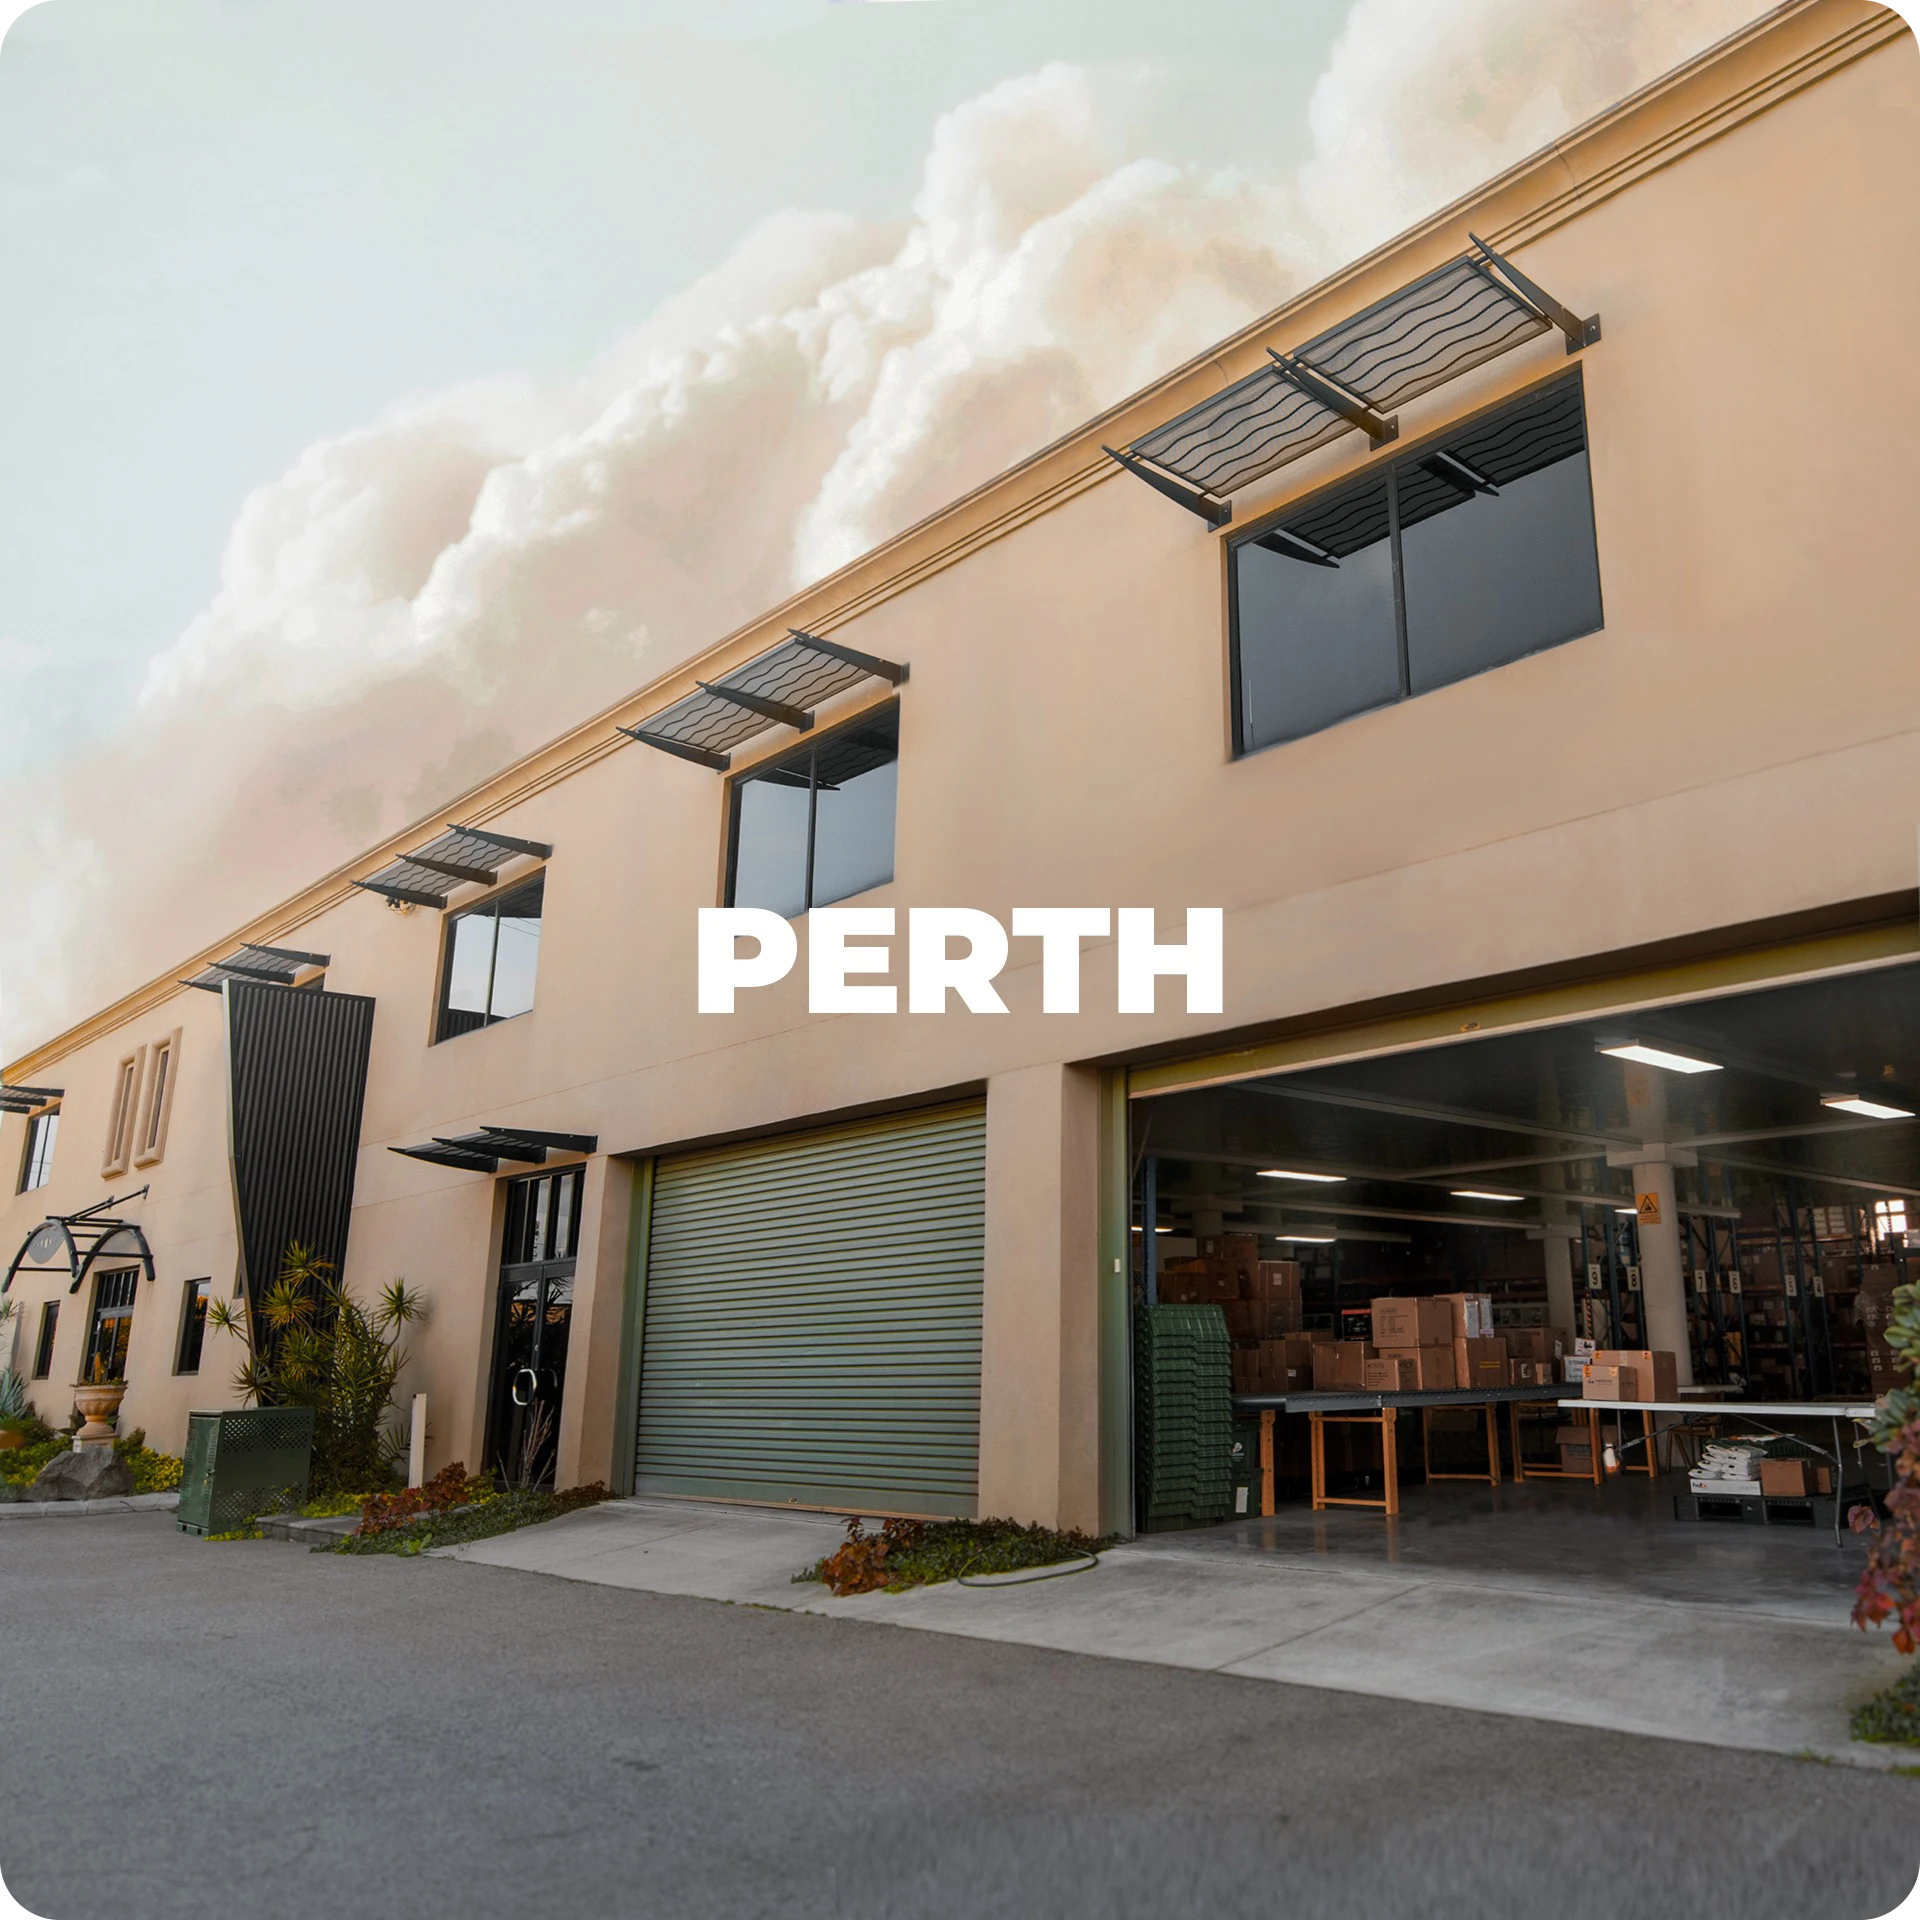 The Perth warehouse of KeepSpace 3PL, with the roller doors open.